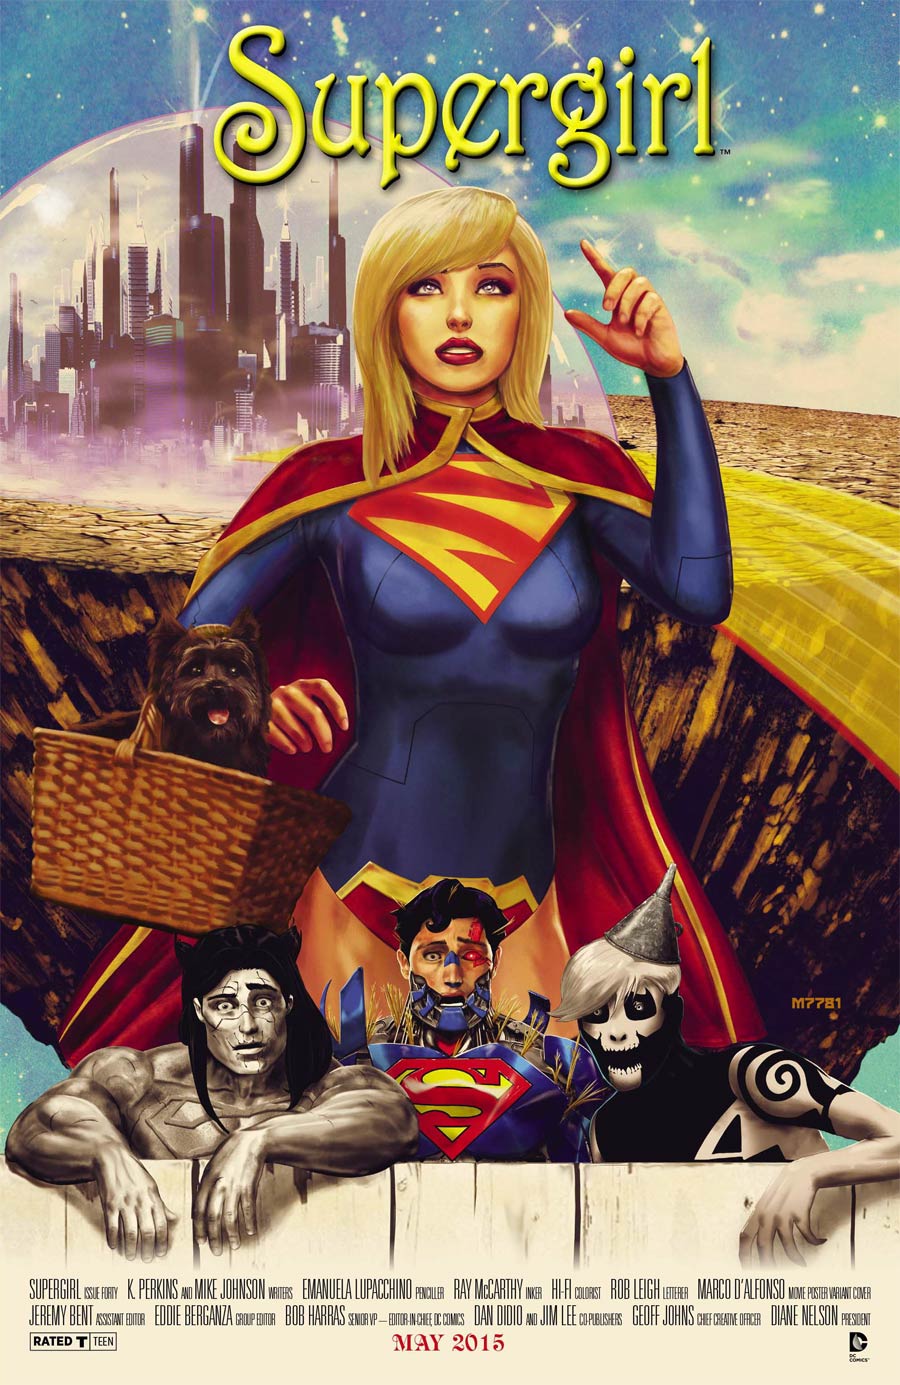 Supergirl Vol 6 #40 Cover B Variant Wizard Of Oz WB Movie Poster Cover